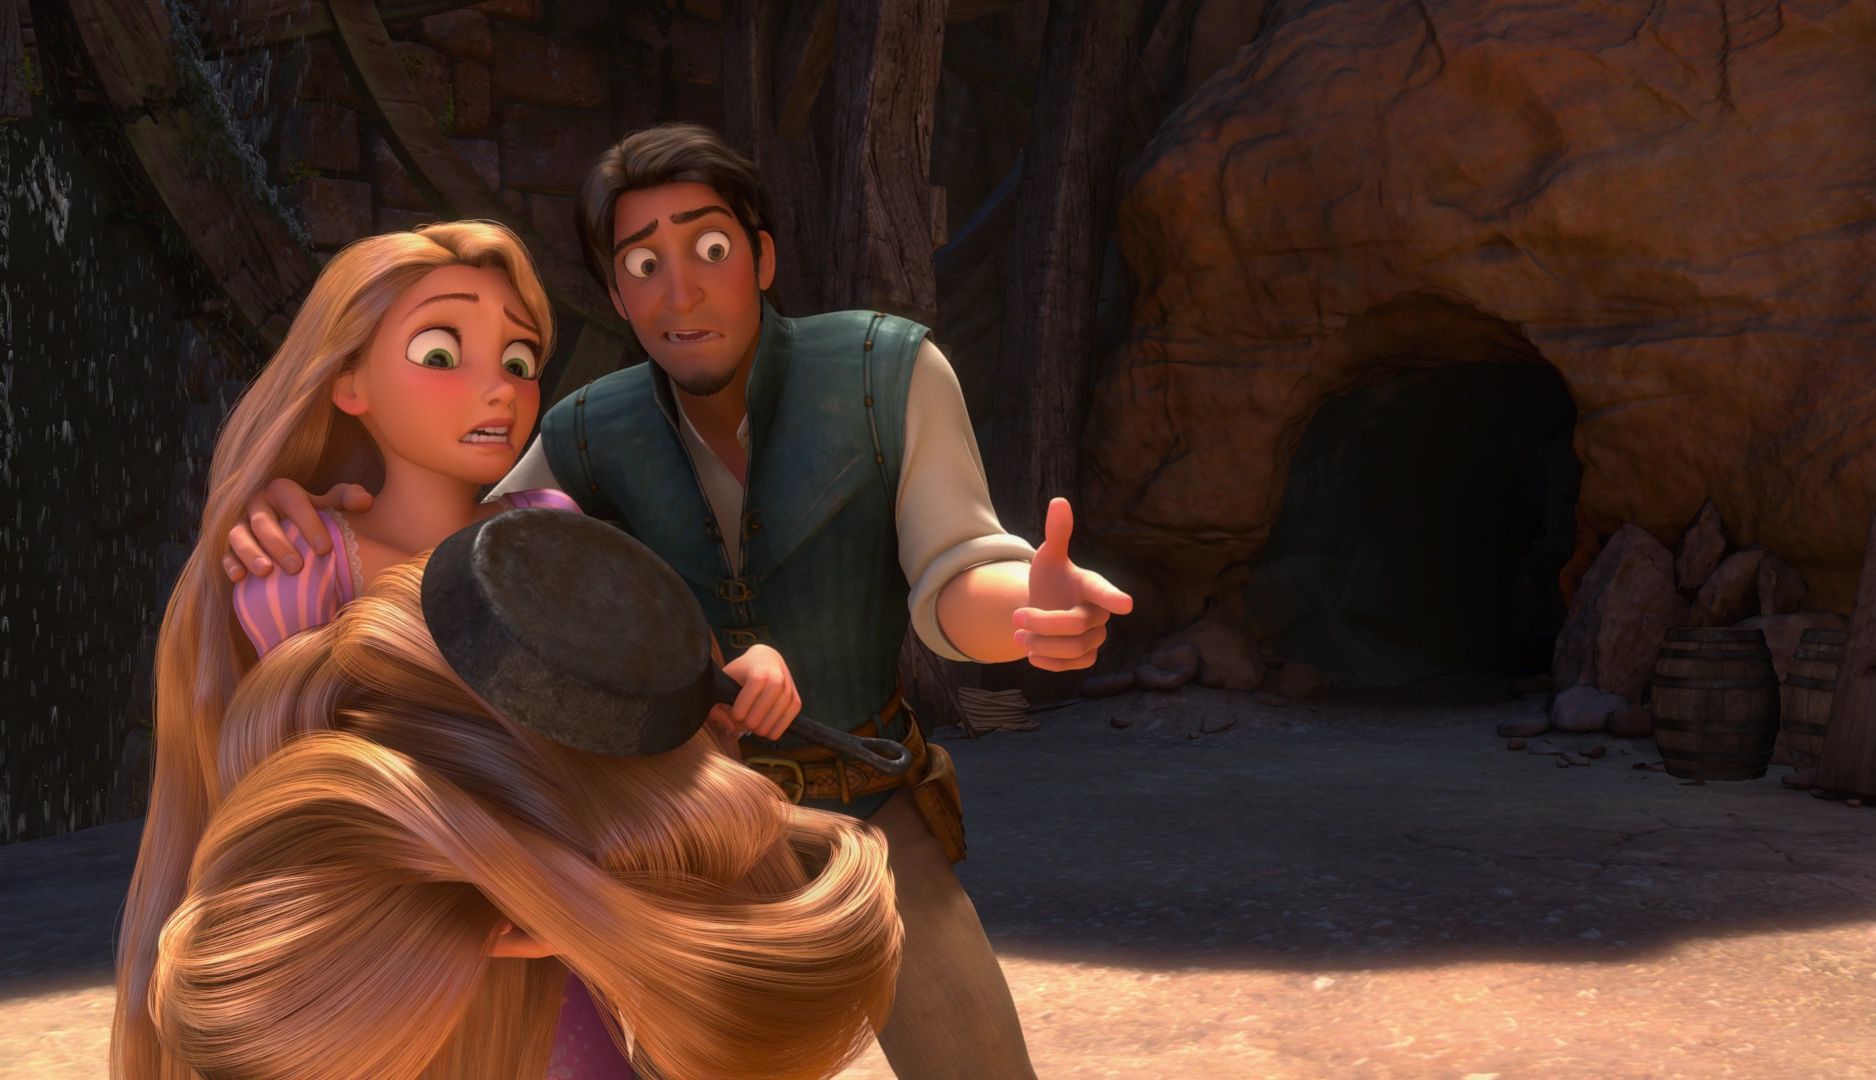 Image of Tangled: Full Movie [Screencaps] for fans of Tangled. 